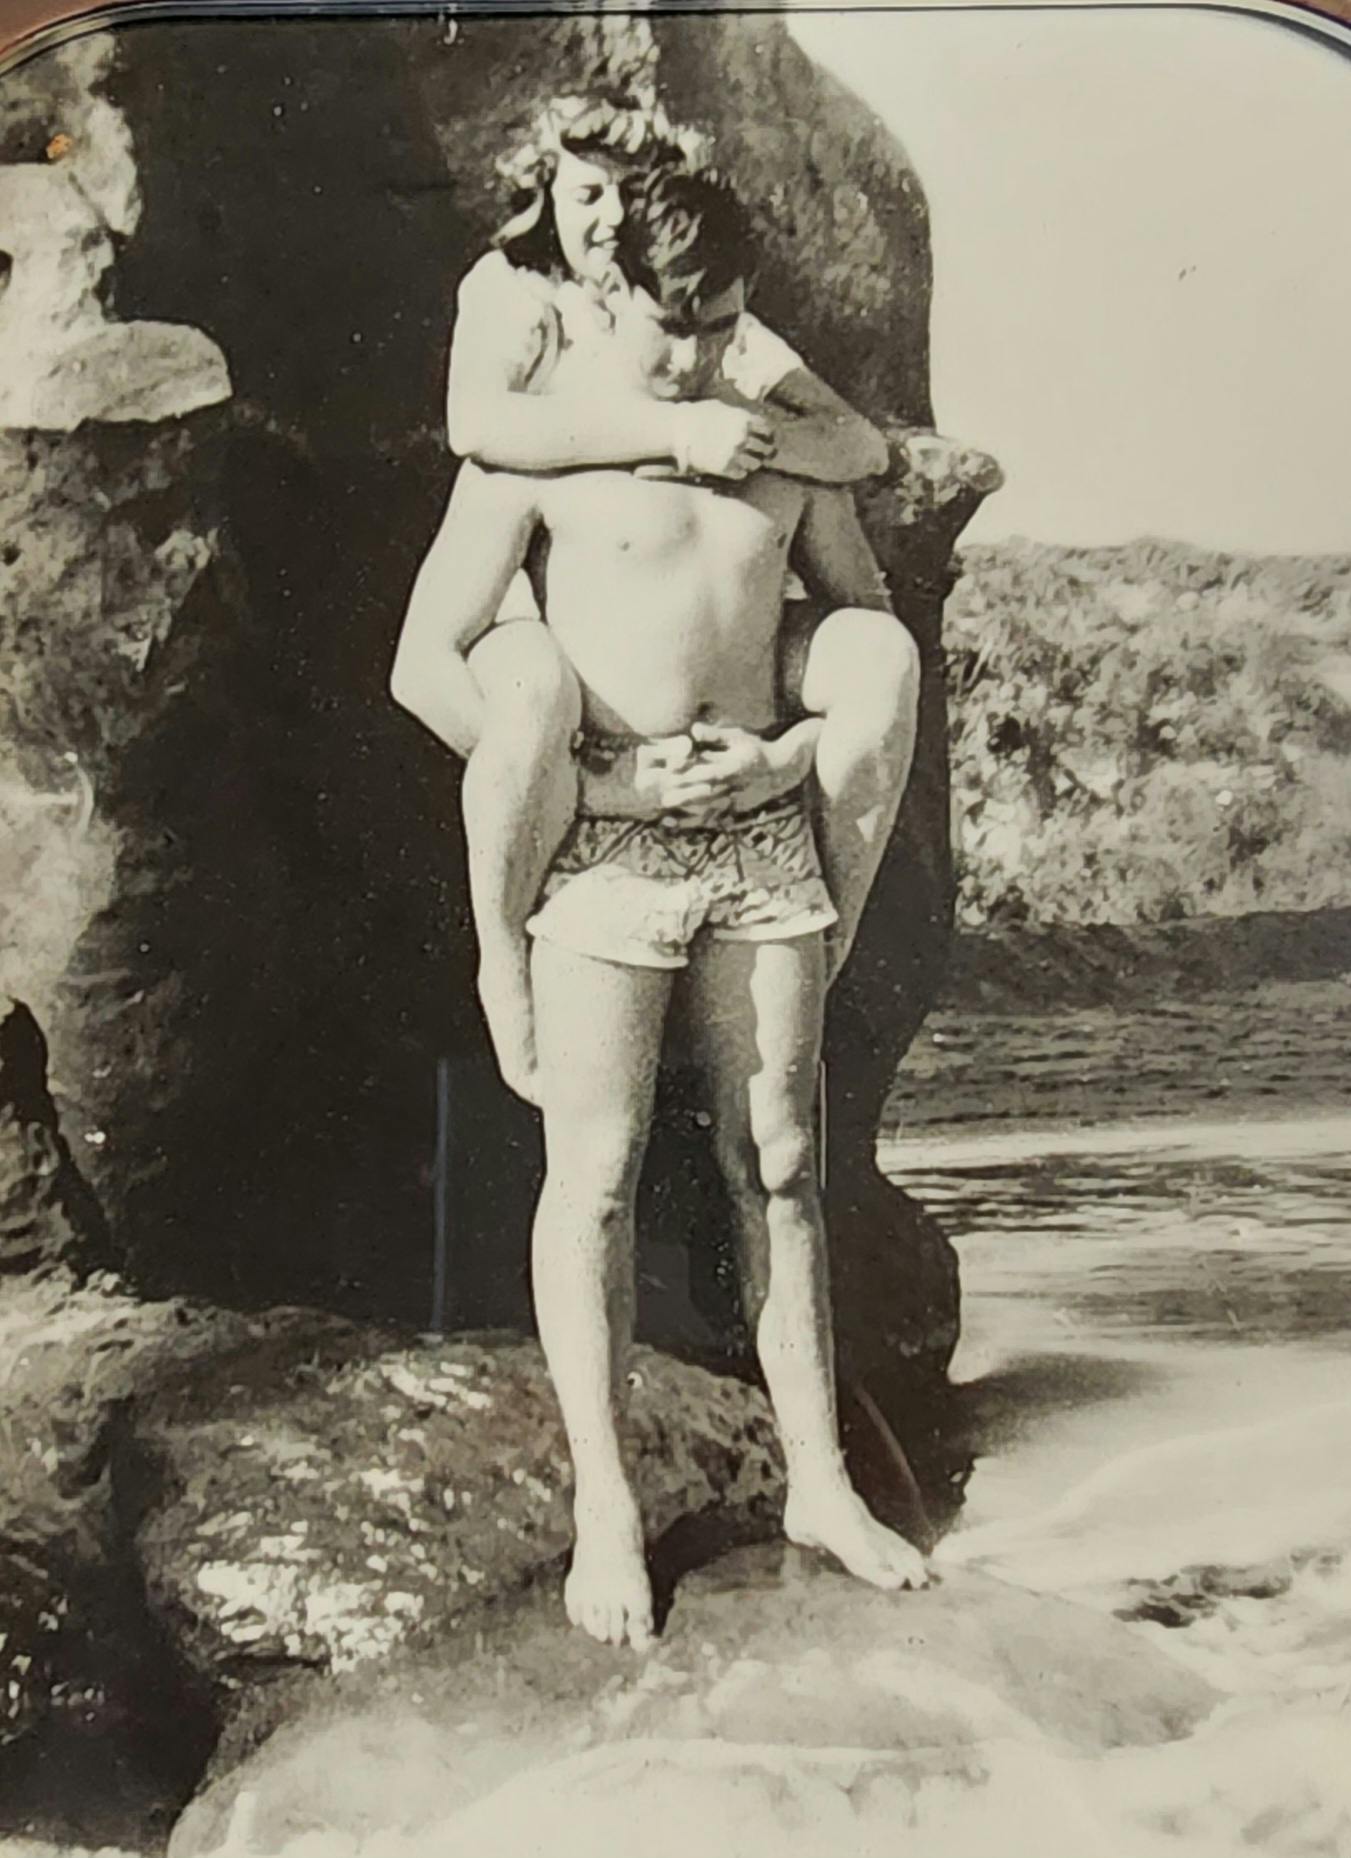 Ritt stands on a rock along the shore while holding a friend on his back